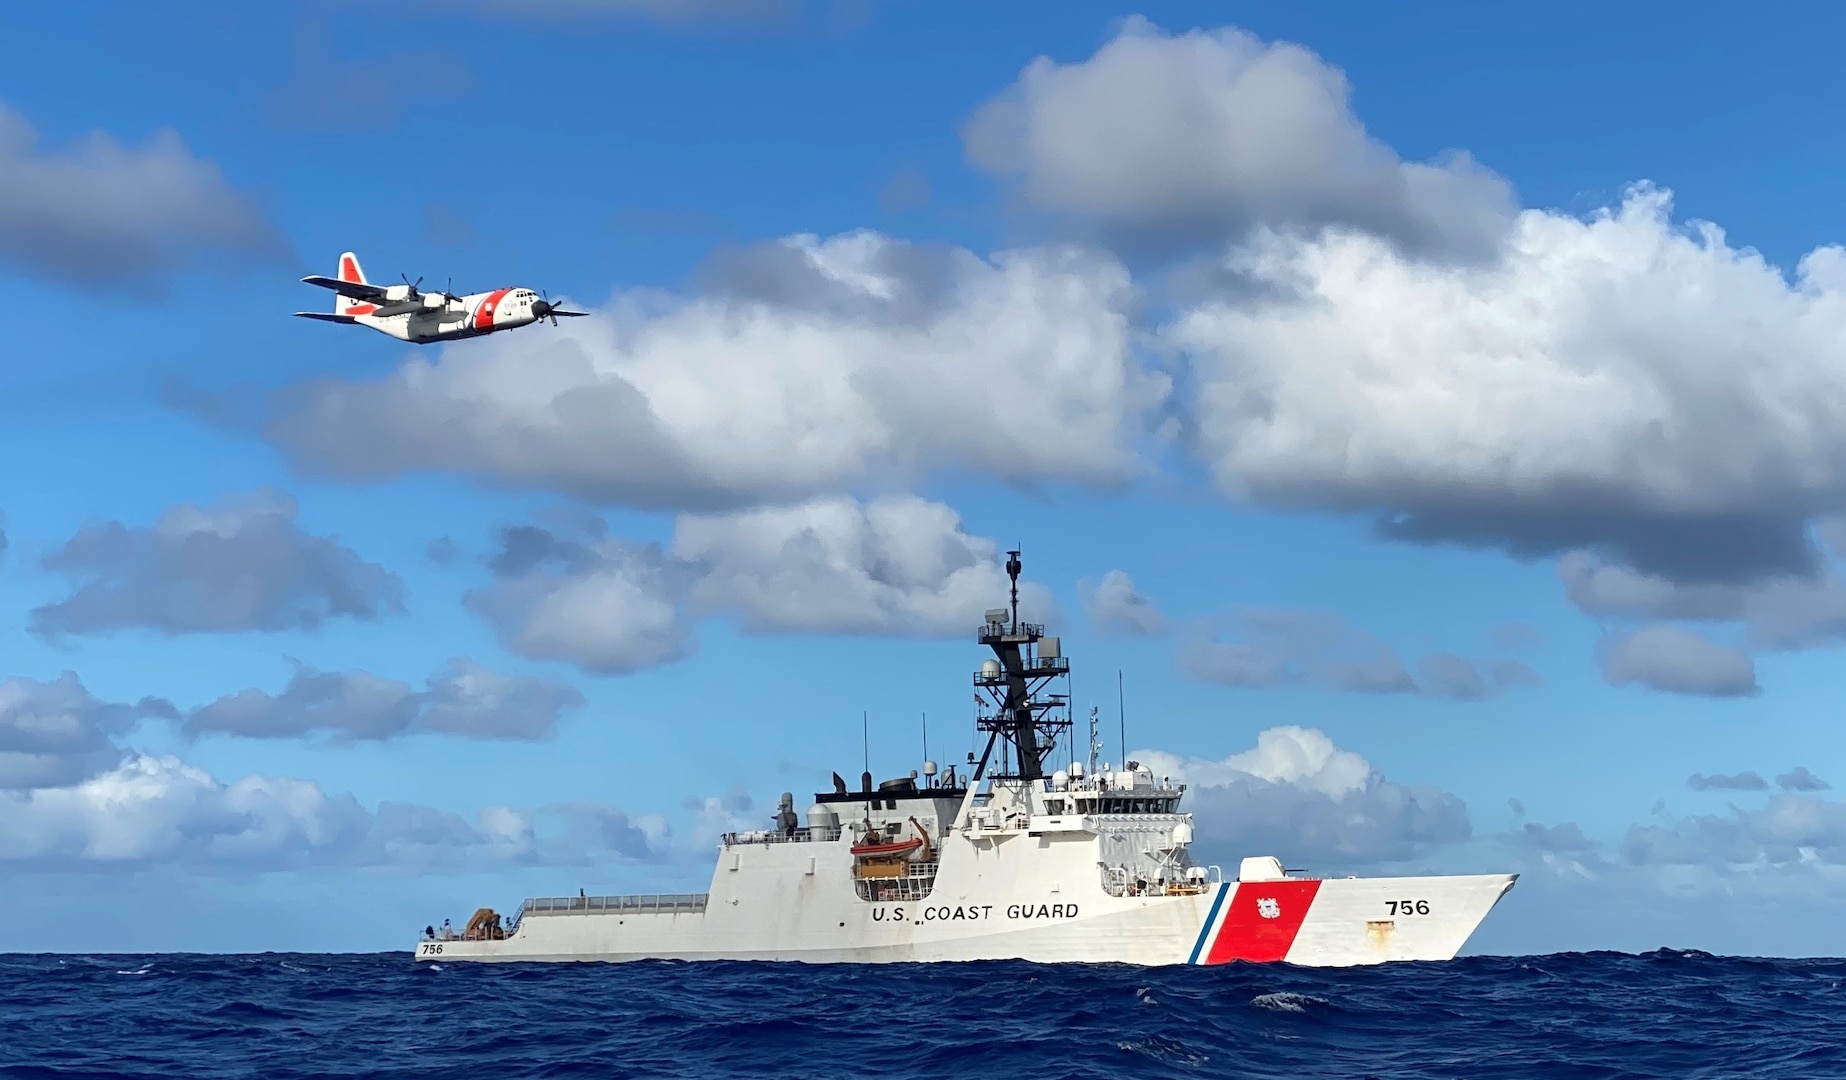 Coast Guard Cutter Returns to Hawaii after Completing Multi-country Operation Targeting Illegal Fishing in the South Pacific Ocean